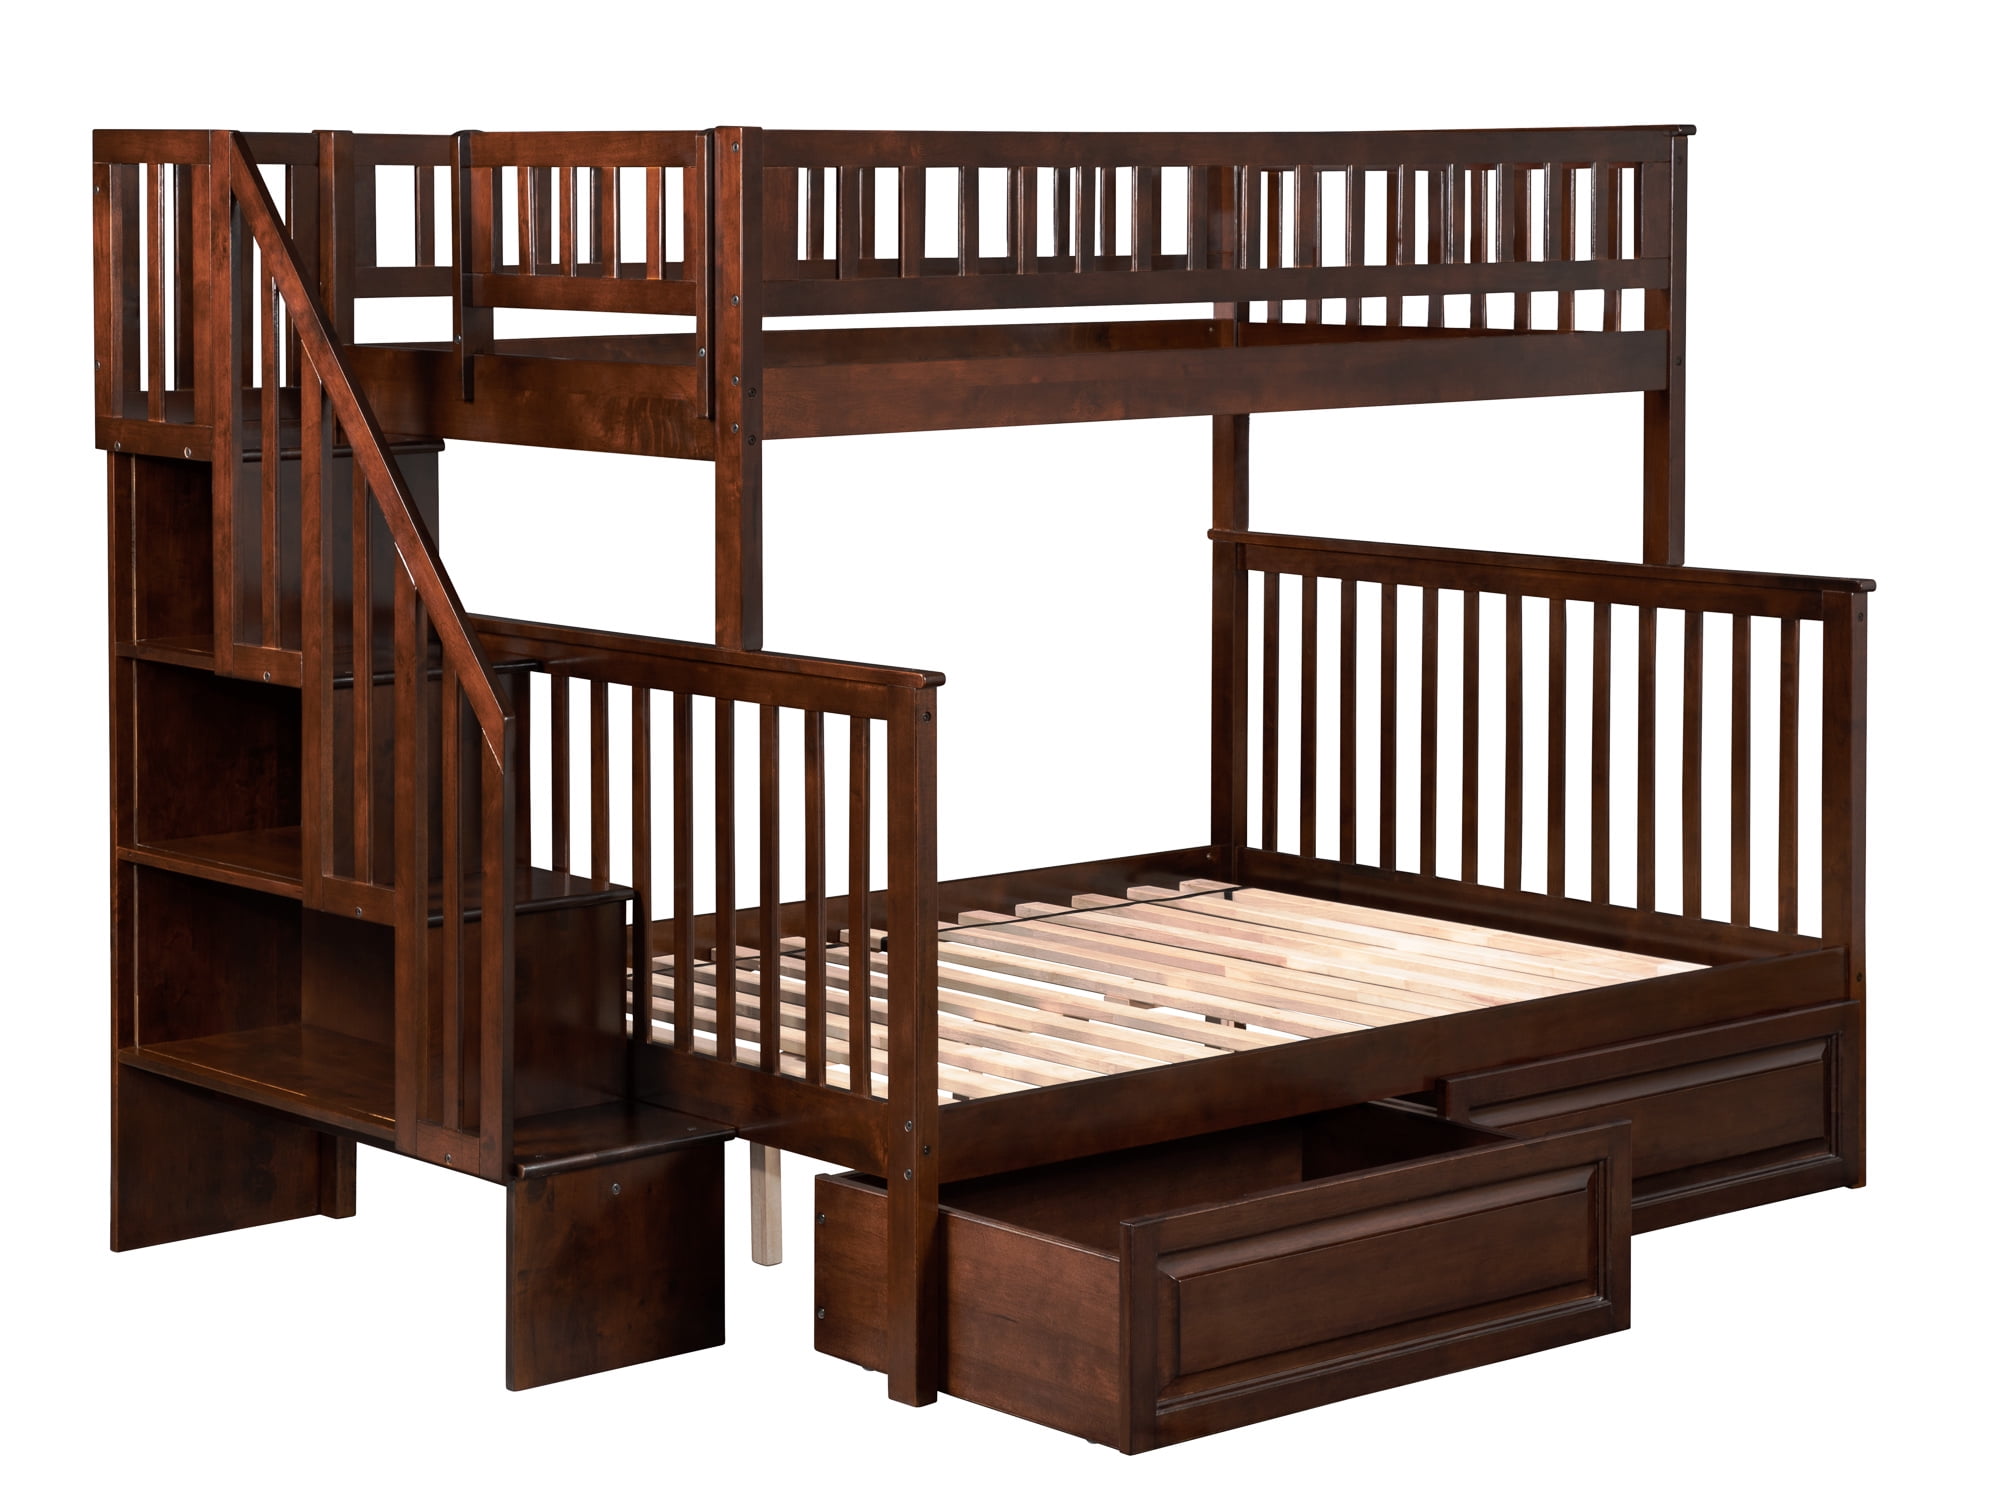 Ab56724 Woodland Staircase Bunk Bed With Raised Panel Bed Drawers, Antique Walnut - Twin & Full